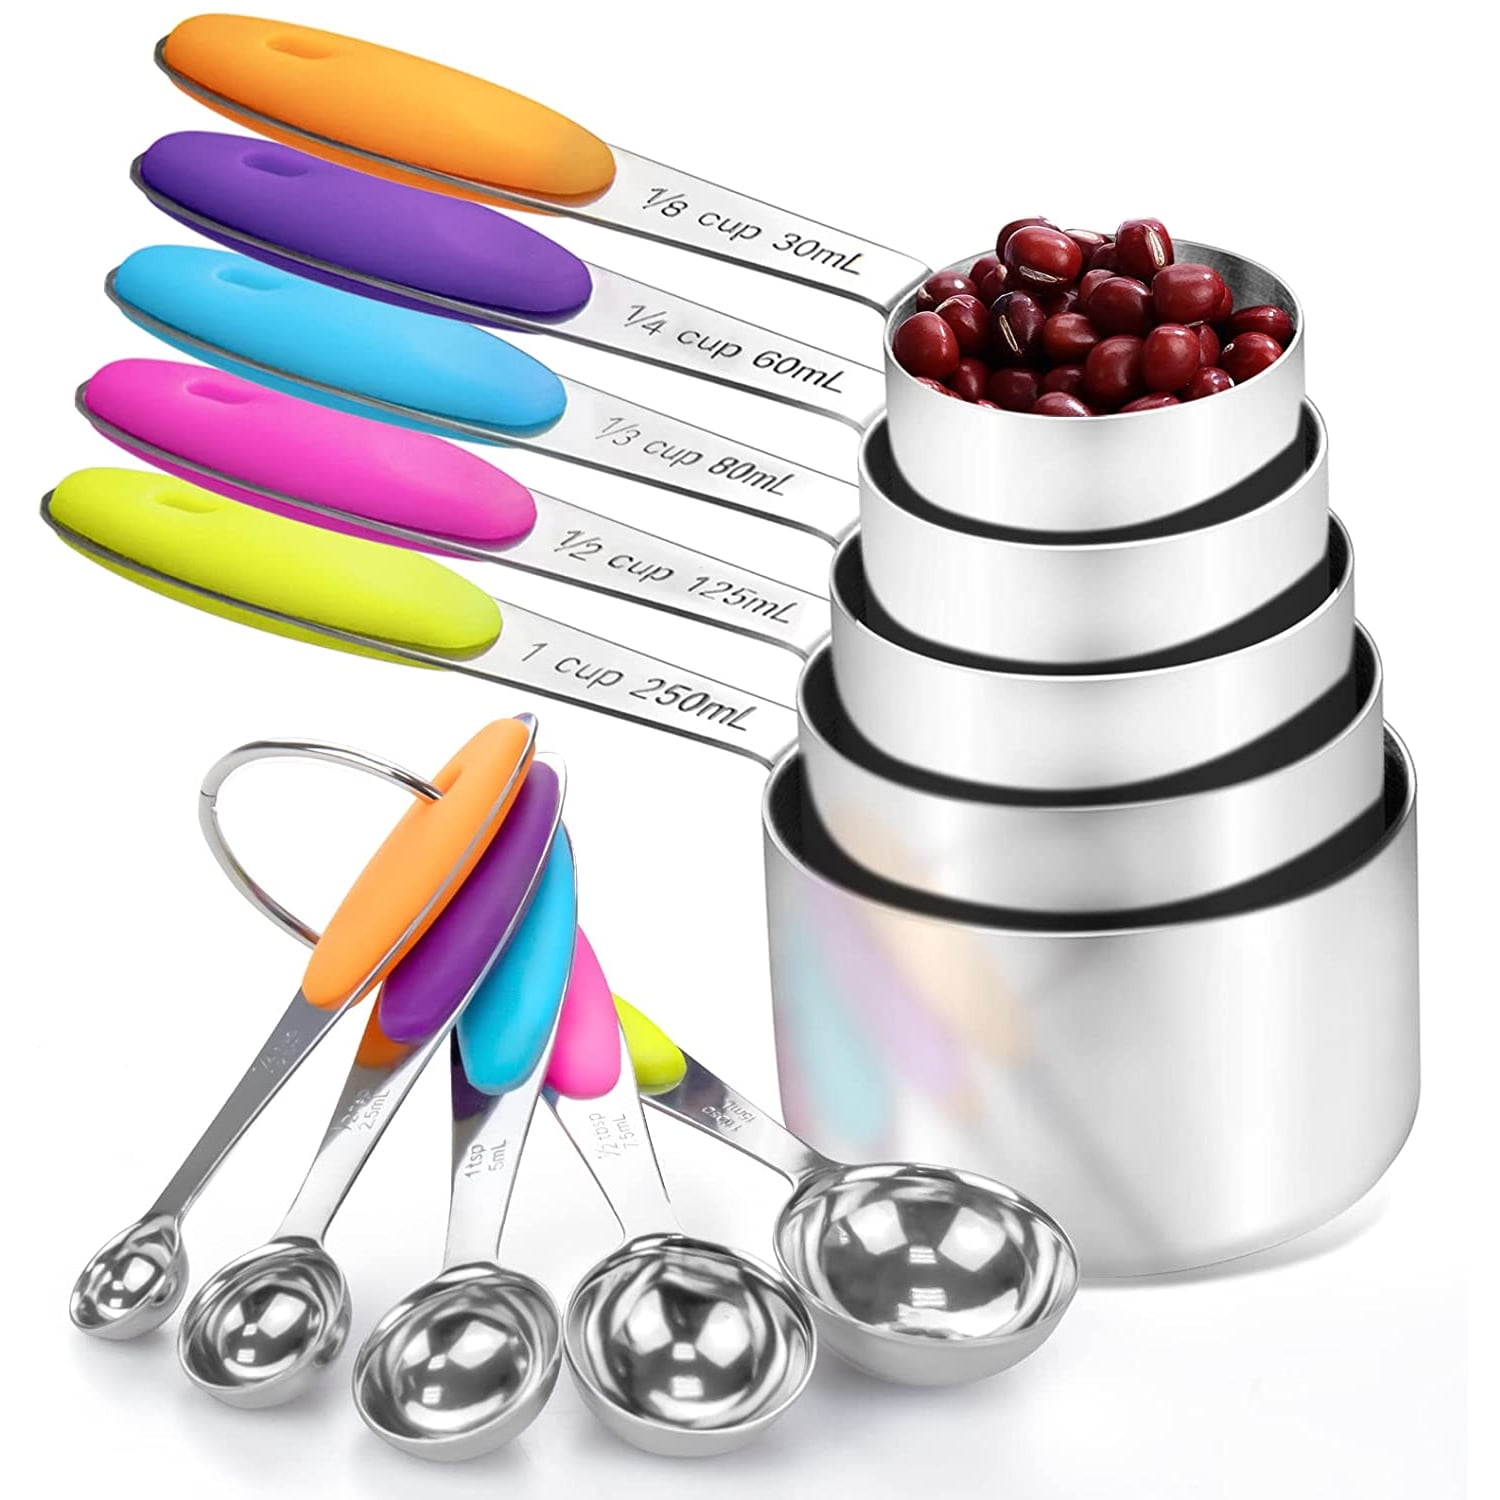 ACAKitchen Stainless Steel Measuring Cups and Spoons Set of 10 Piece, with  Soft Touch Colorful Silicone Handles for Dry and Liquid Ingredients